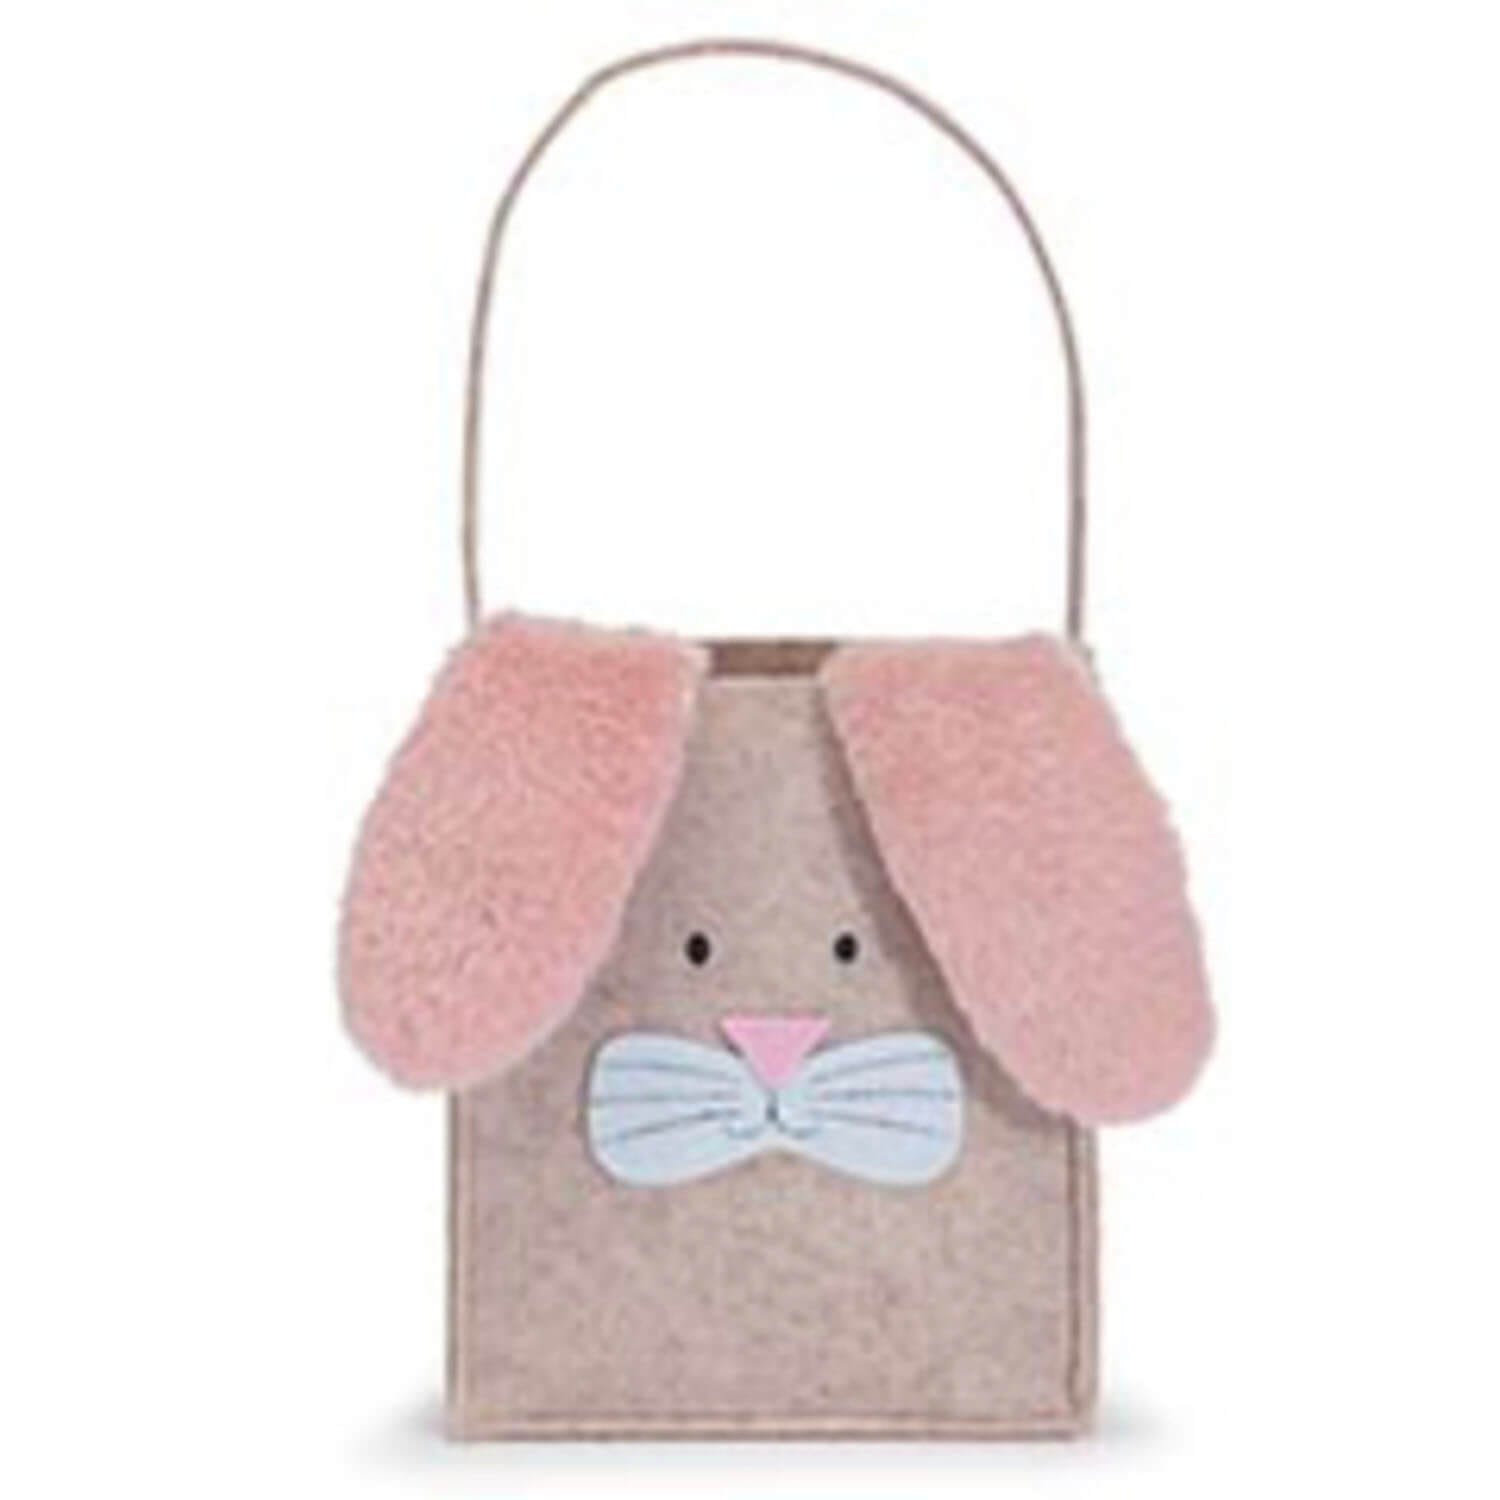 Gray and pink felt Easter bunny gift bag available from Just Peachy in Little Rock.